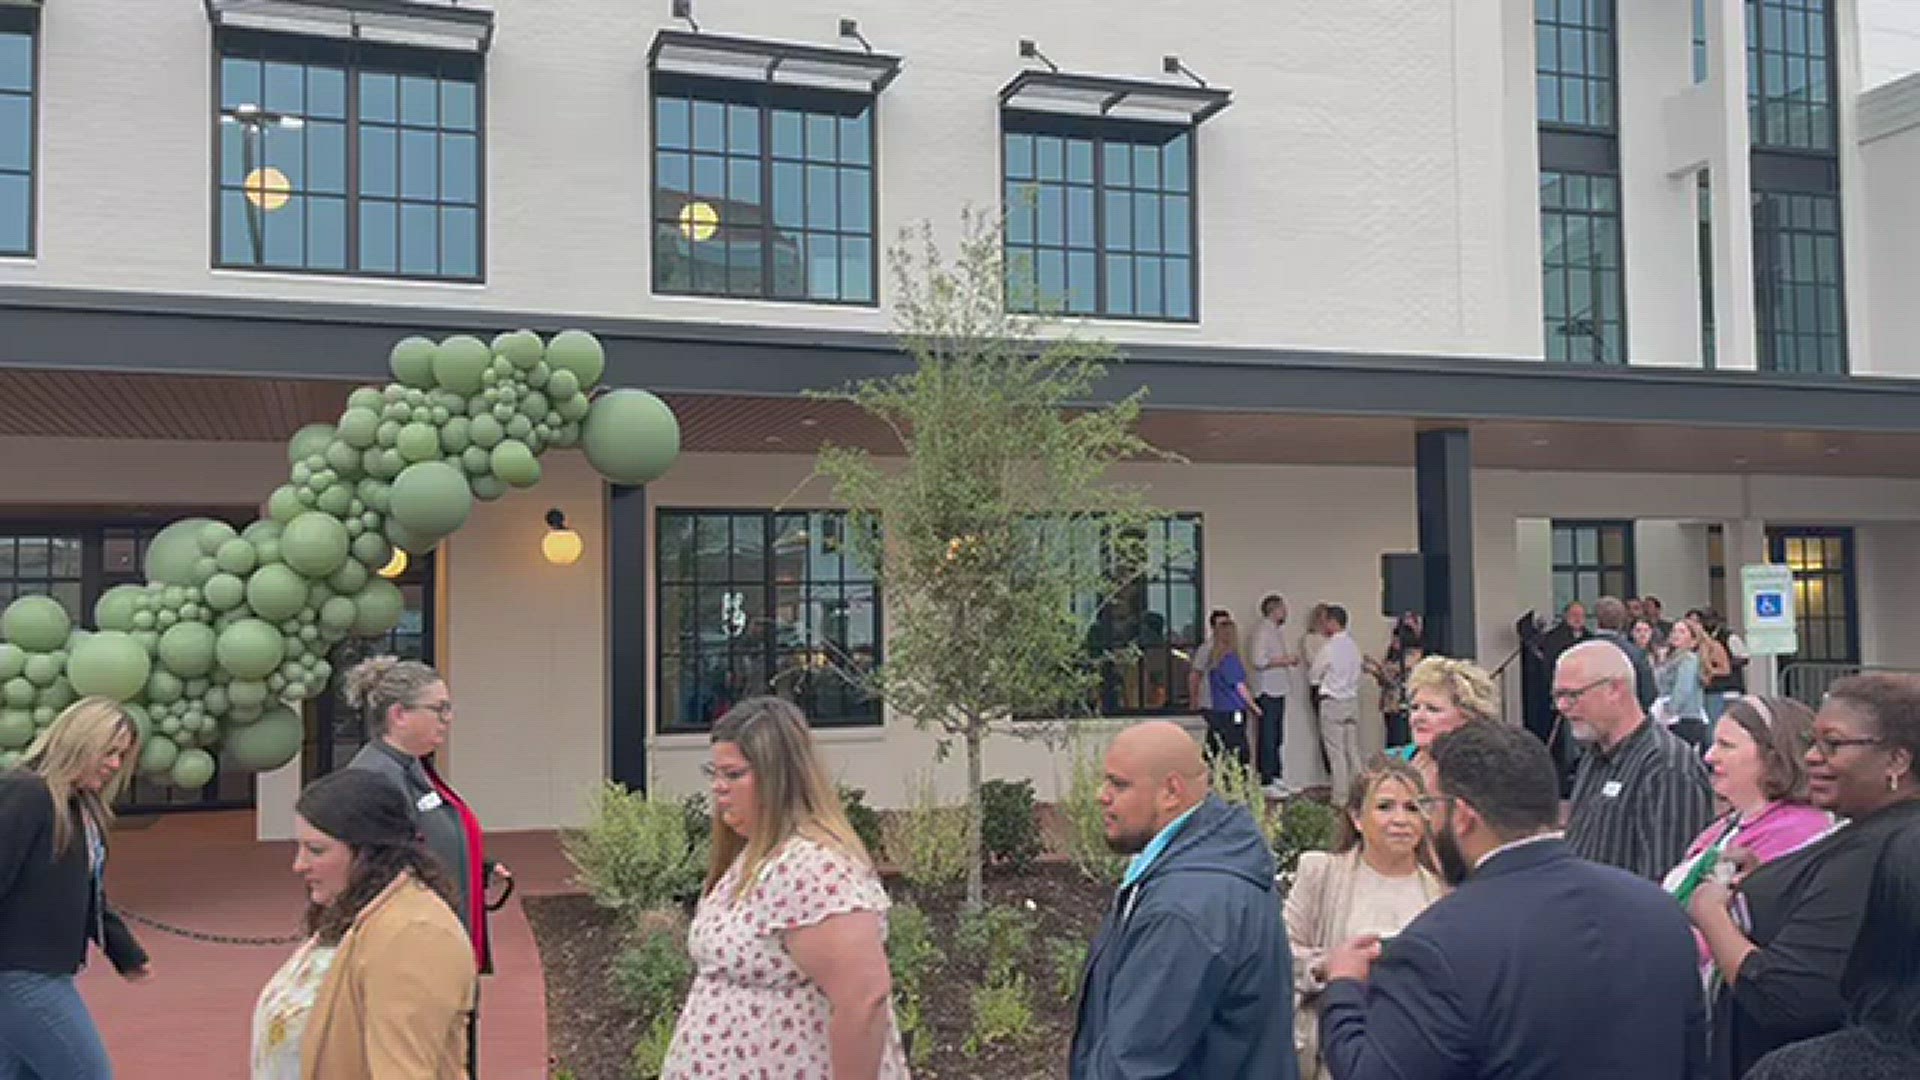 Dozens of people showed up to see grand opening of the new Magnolia headquarters in downtown Waco.